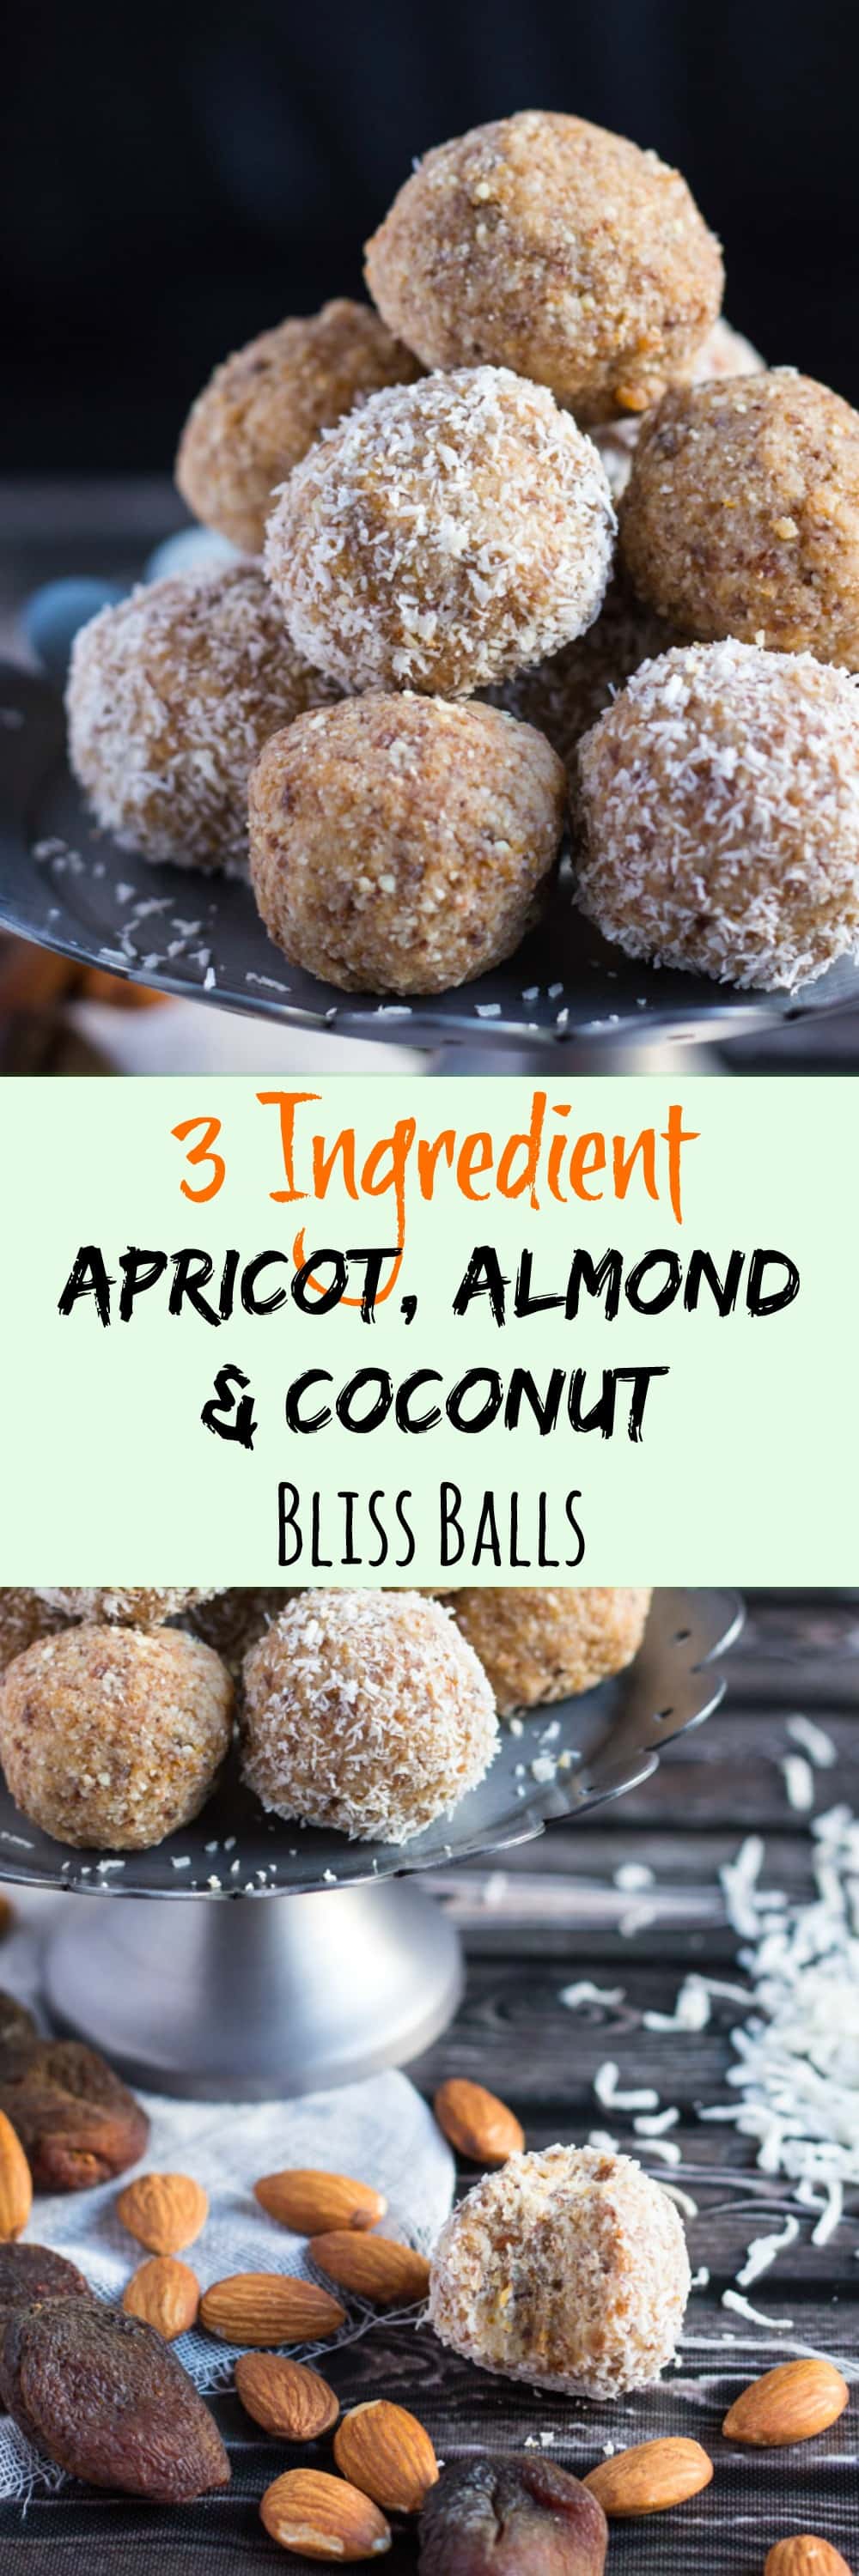 3 Ingredient Apricot Almond & Coconut Bliss Balls. Quick to make & handy for emergency snacks.